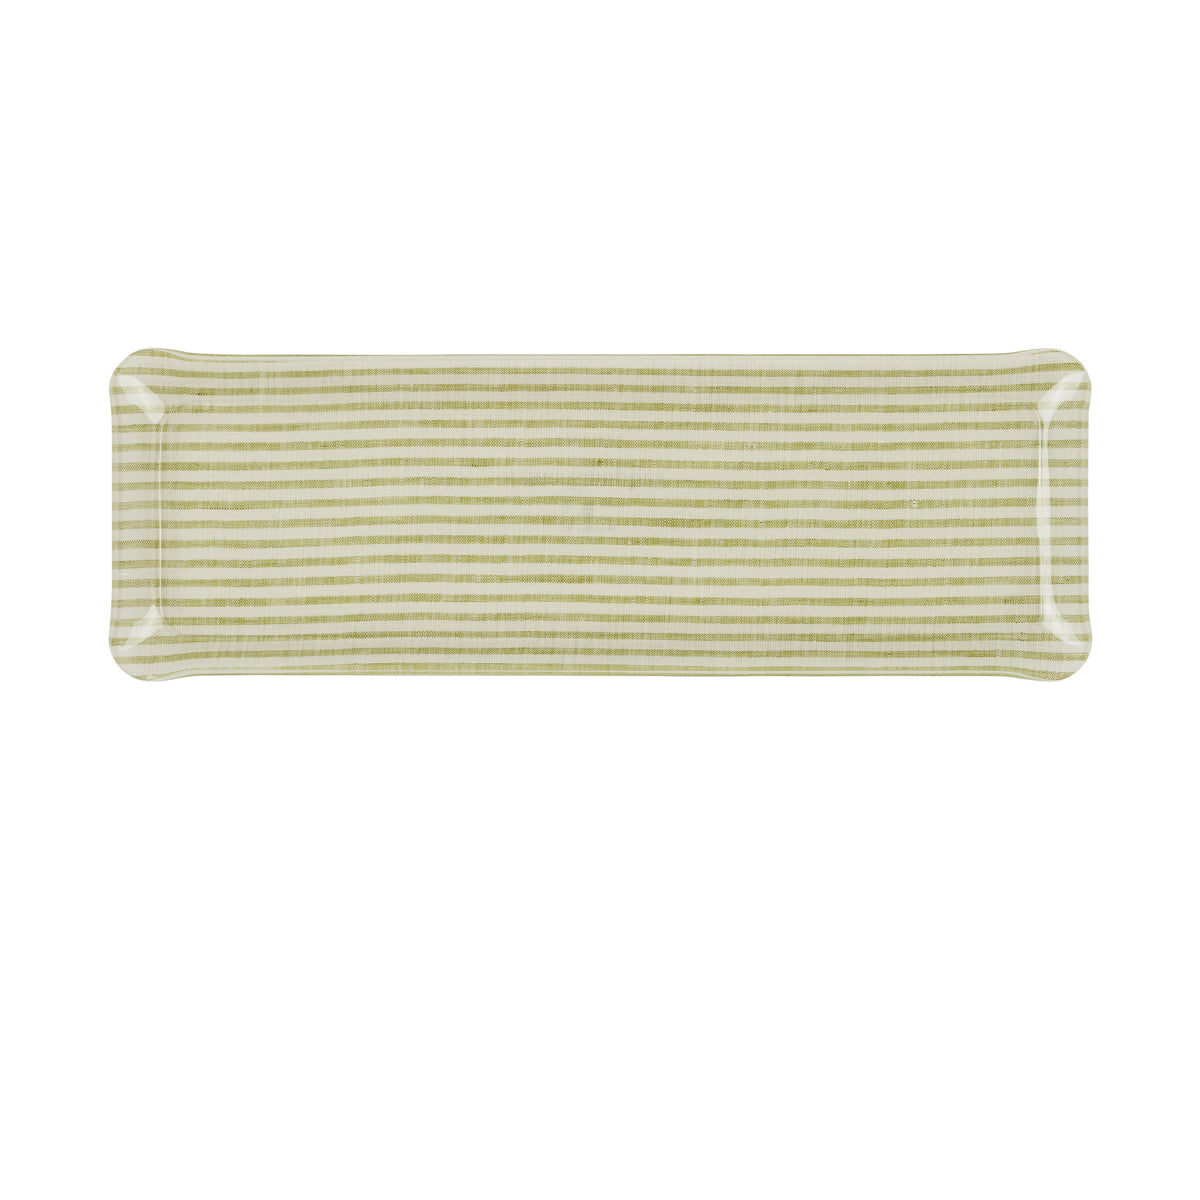 Nina Campbell Fabric Tray Oblong - Stripe Green and White